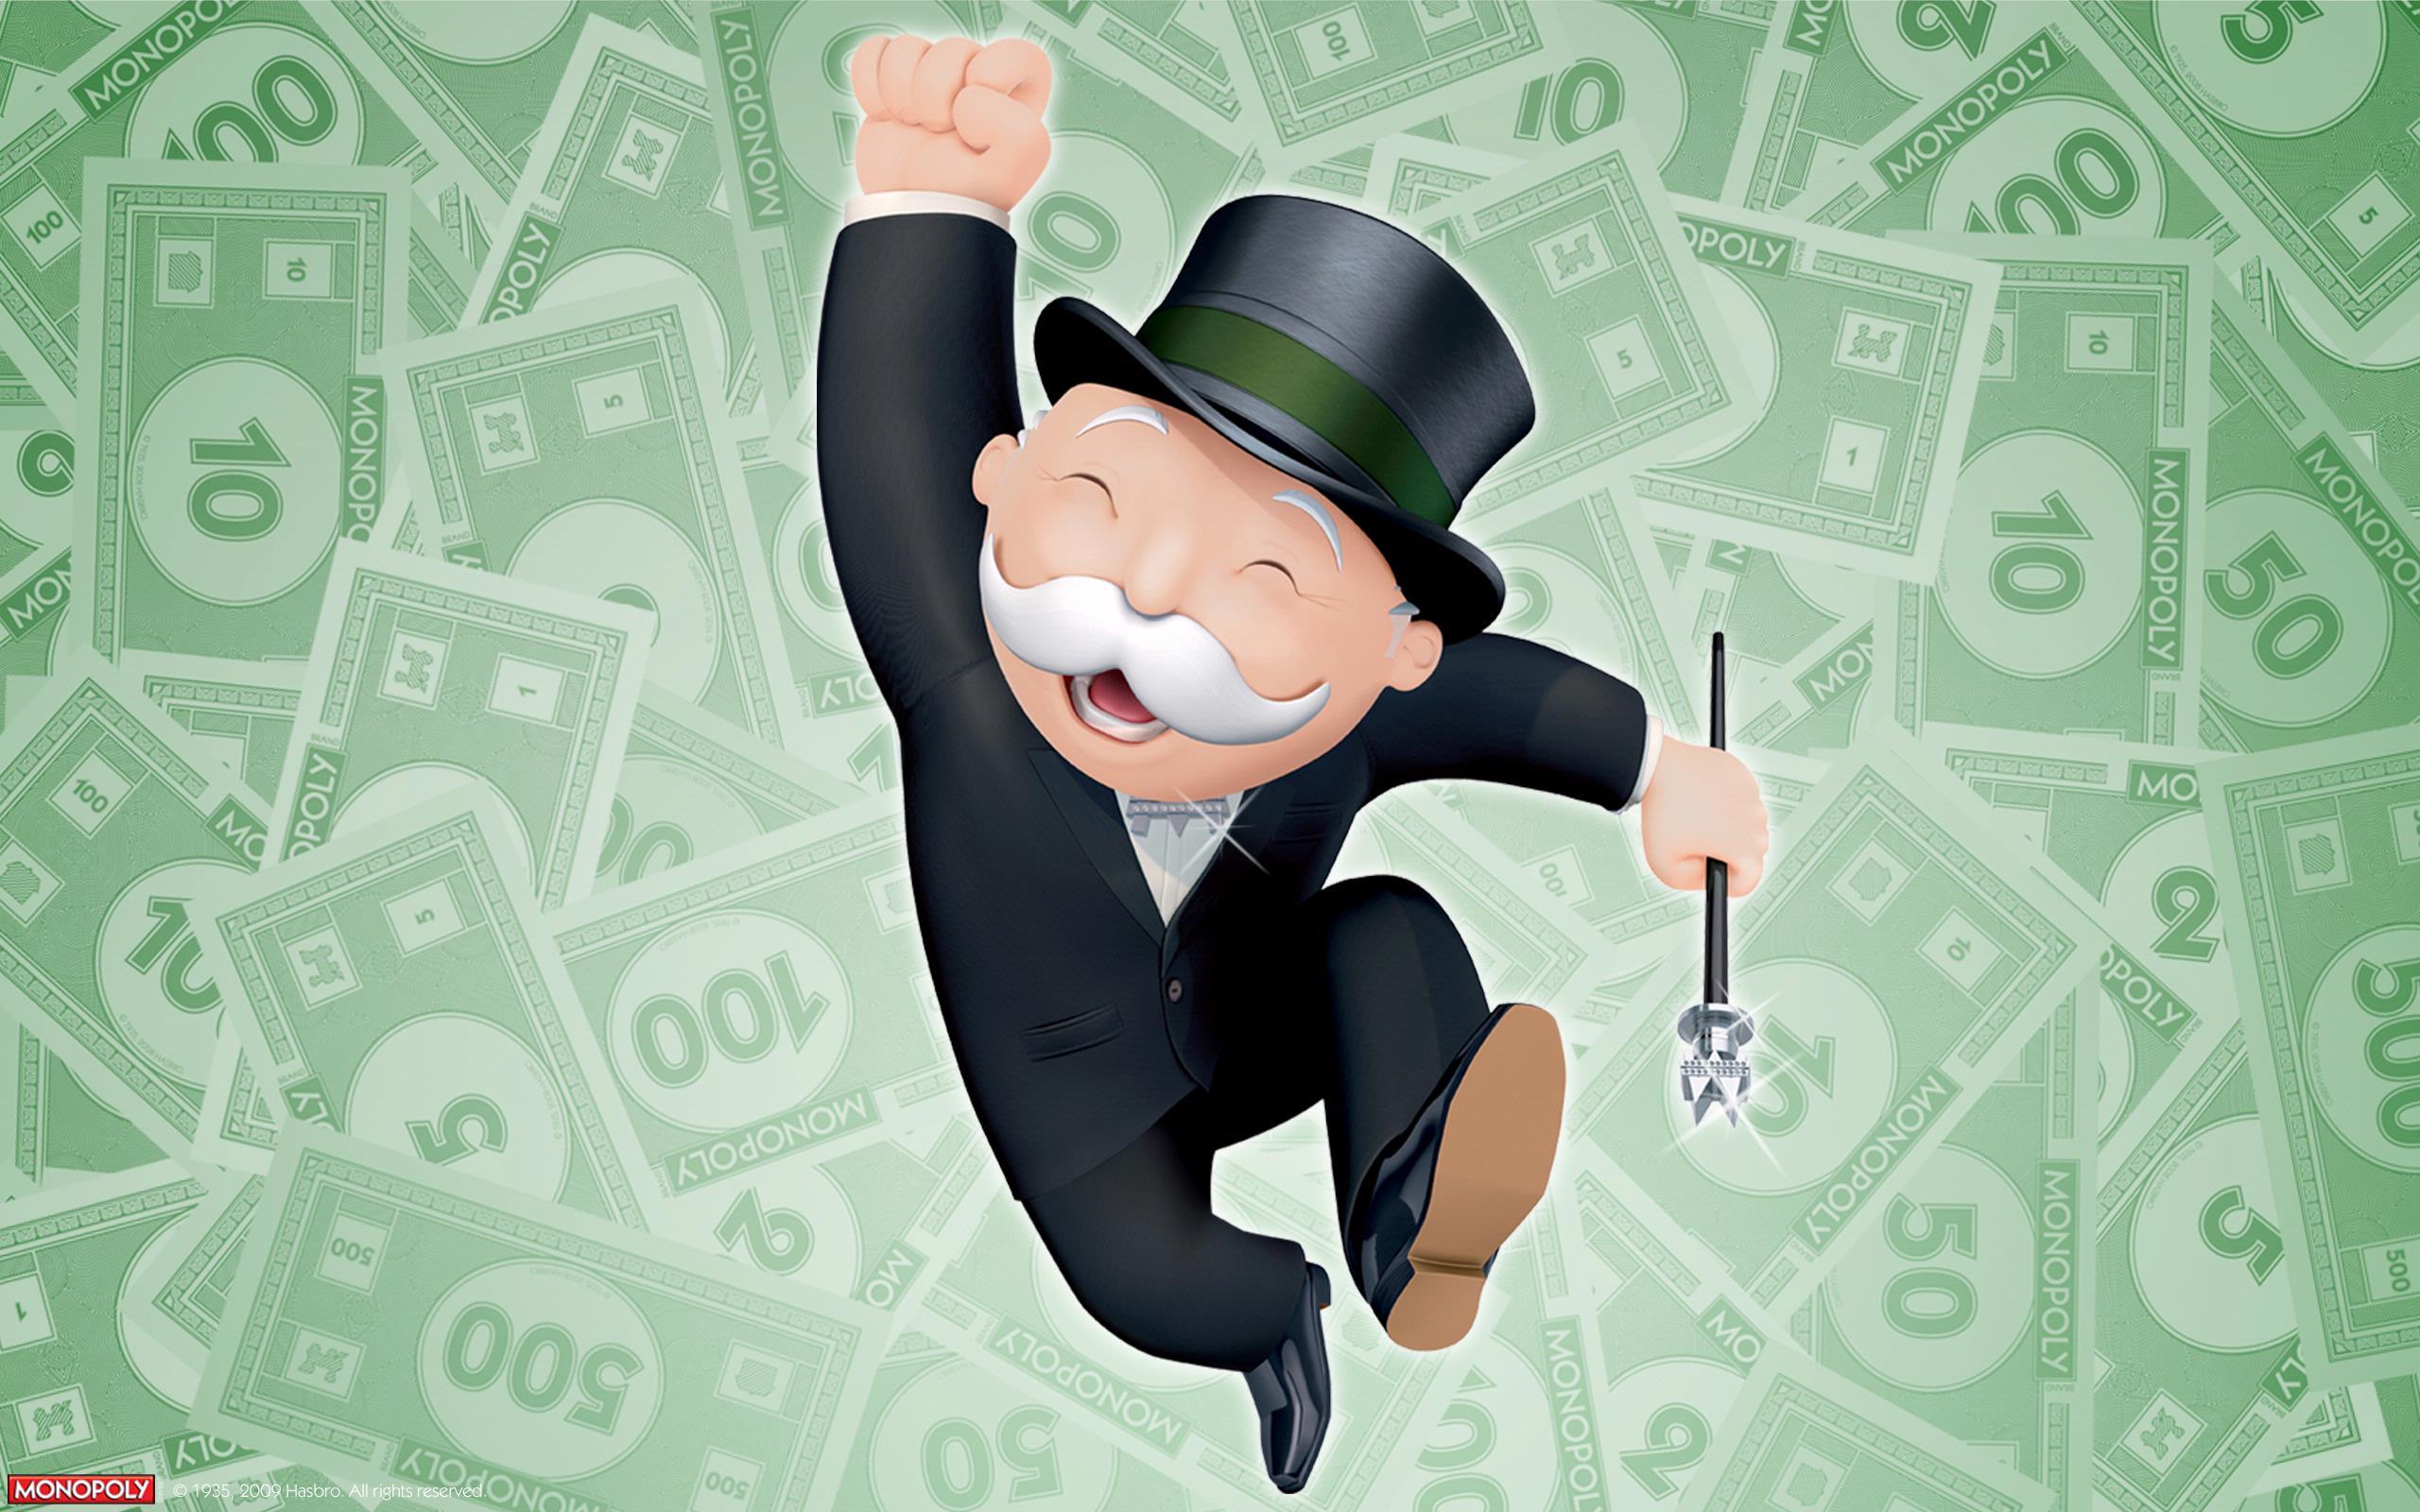 26 Monopoly HD Wallpapers.